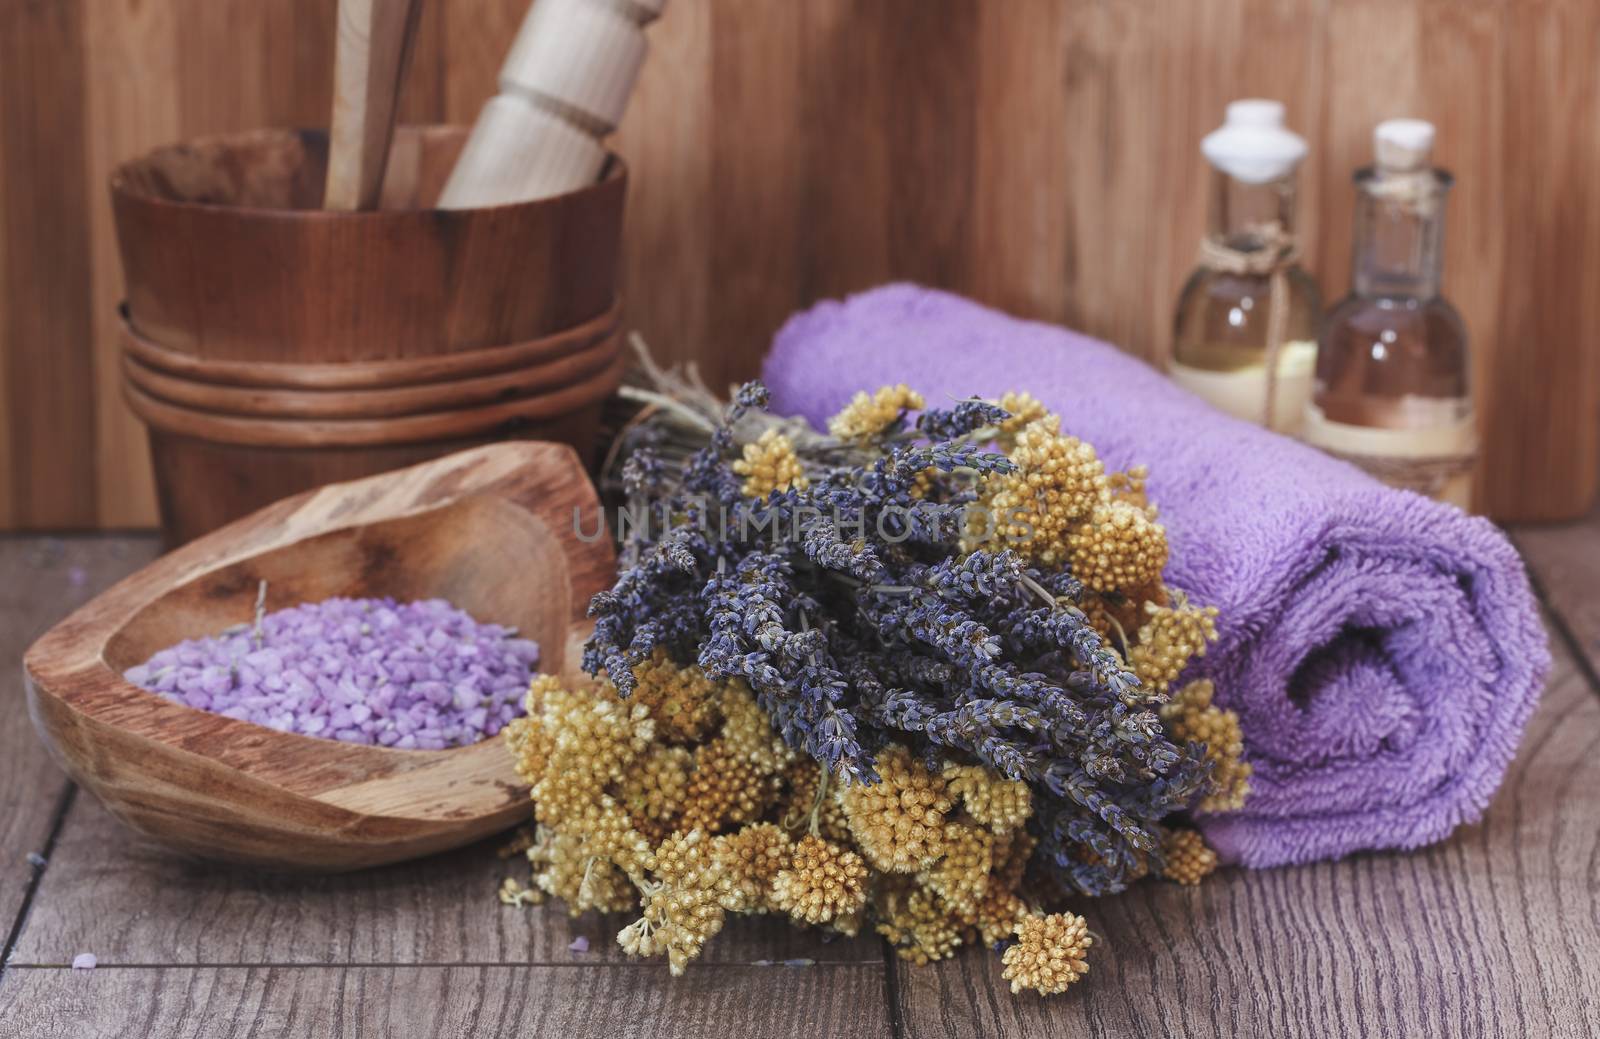 Natural spa treatment with lavender and helichrysum (immortelle). Macro selective focus with retro style processing